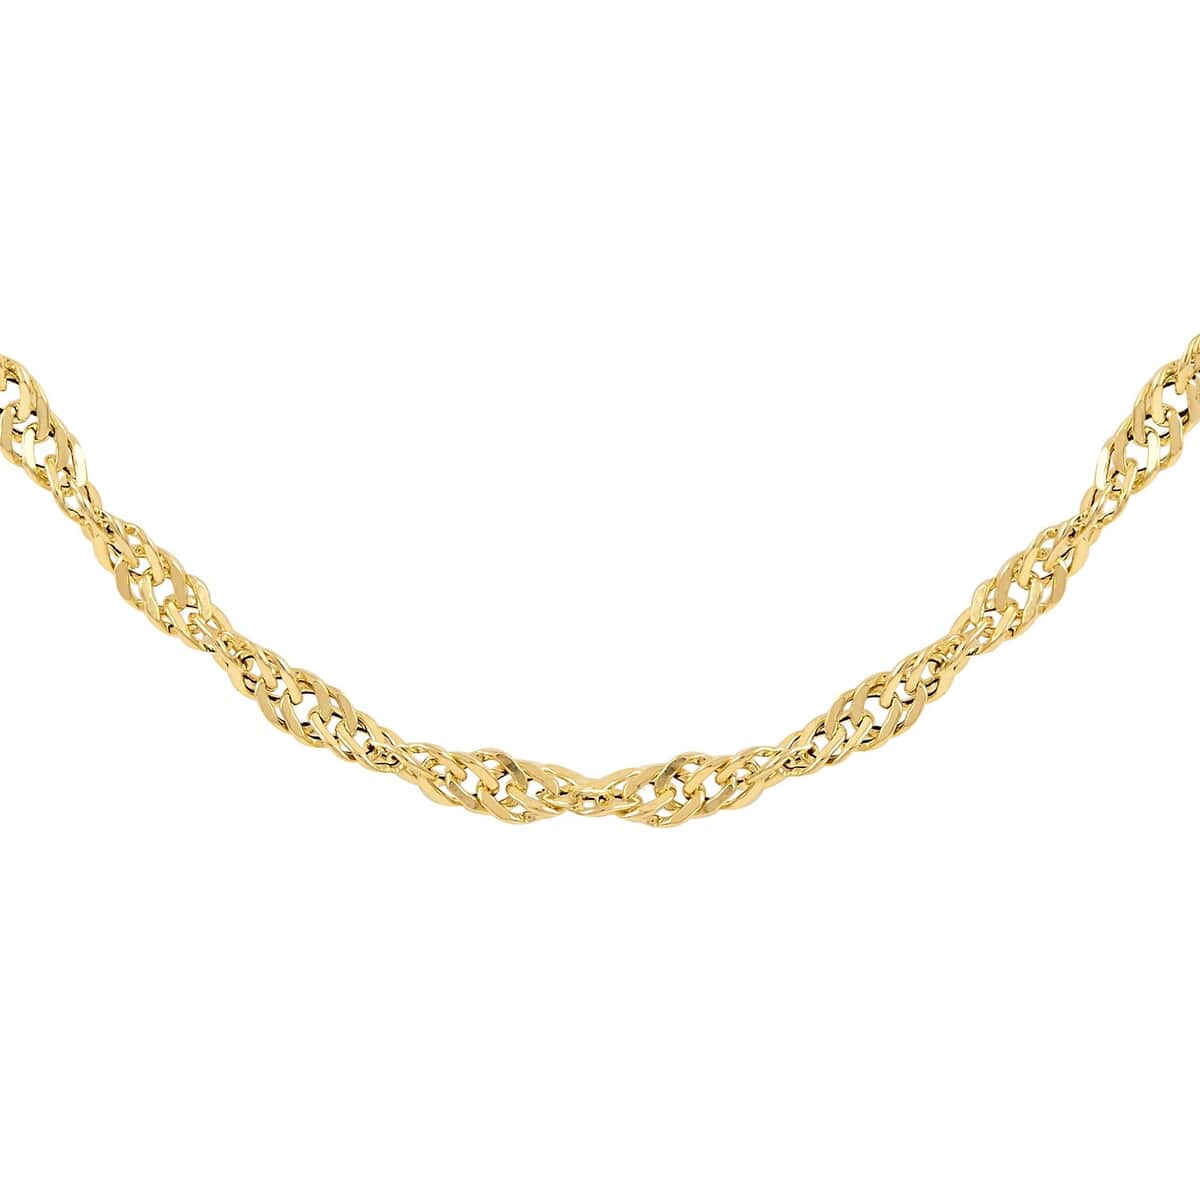 Italian Designer Singapore Necklace 14K Yellow Gold, Gold Chain, Chain Necklace (18 Inches) image number 0